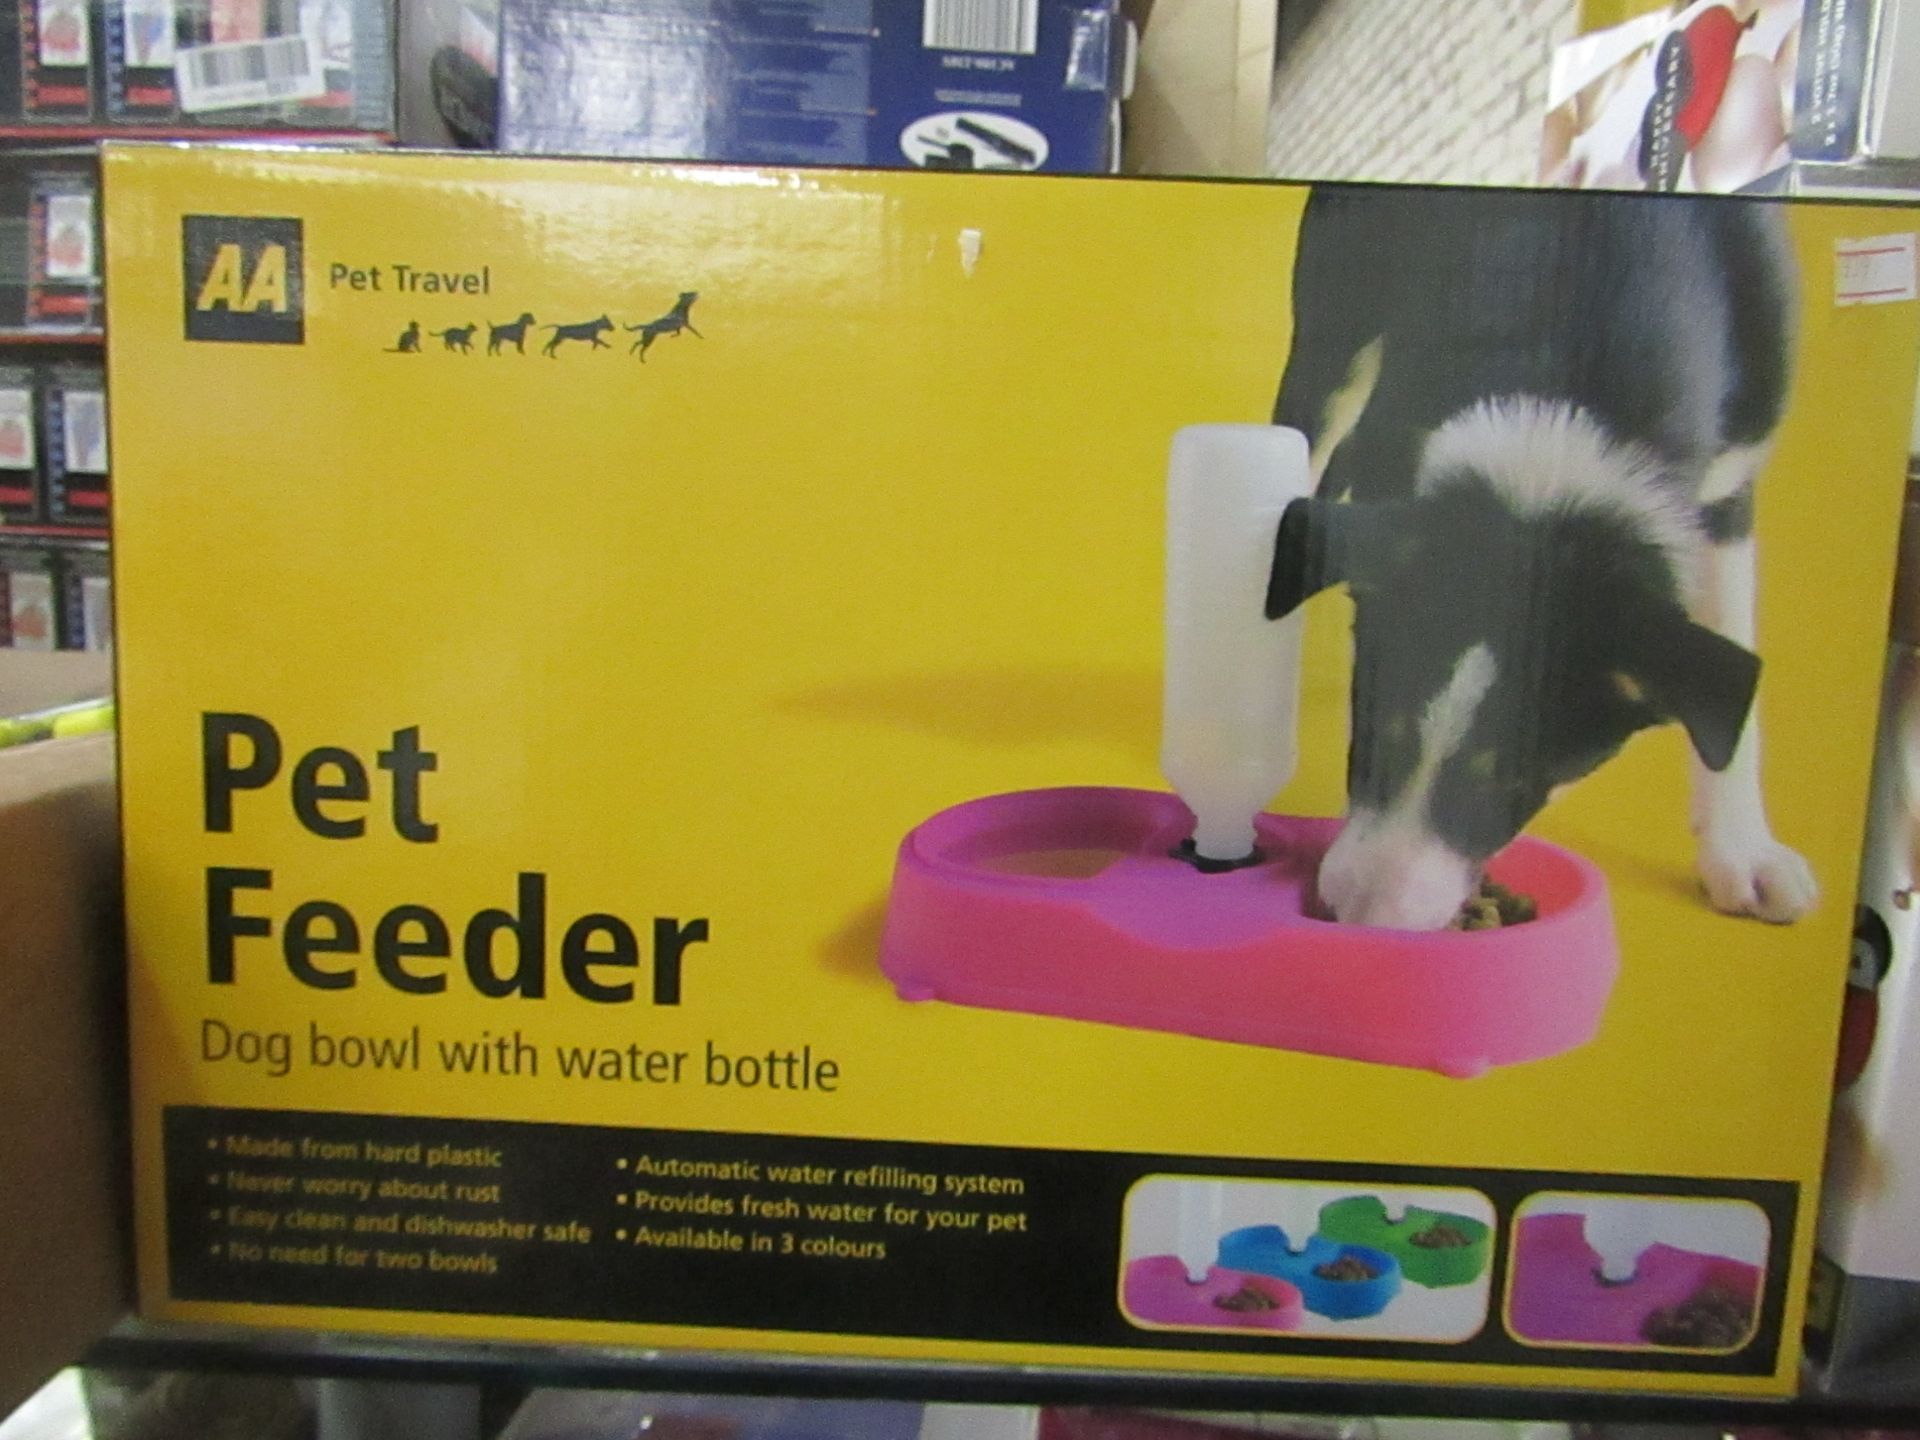 AA Pet Travel dog feeder comes with dog bowl and water bottle , seems unused and boxed.